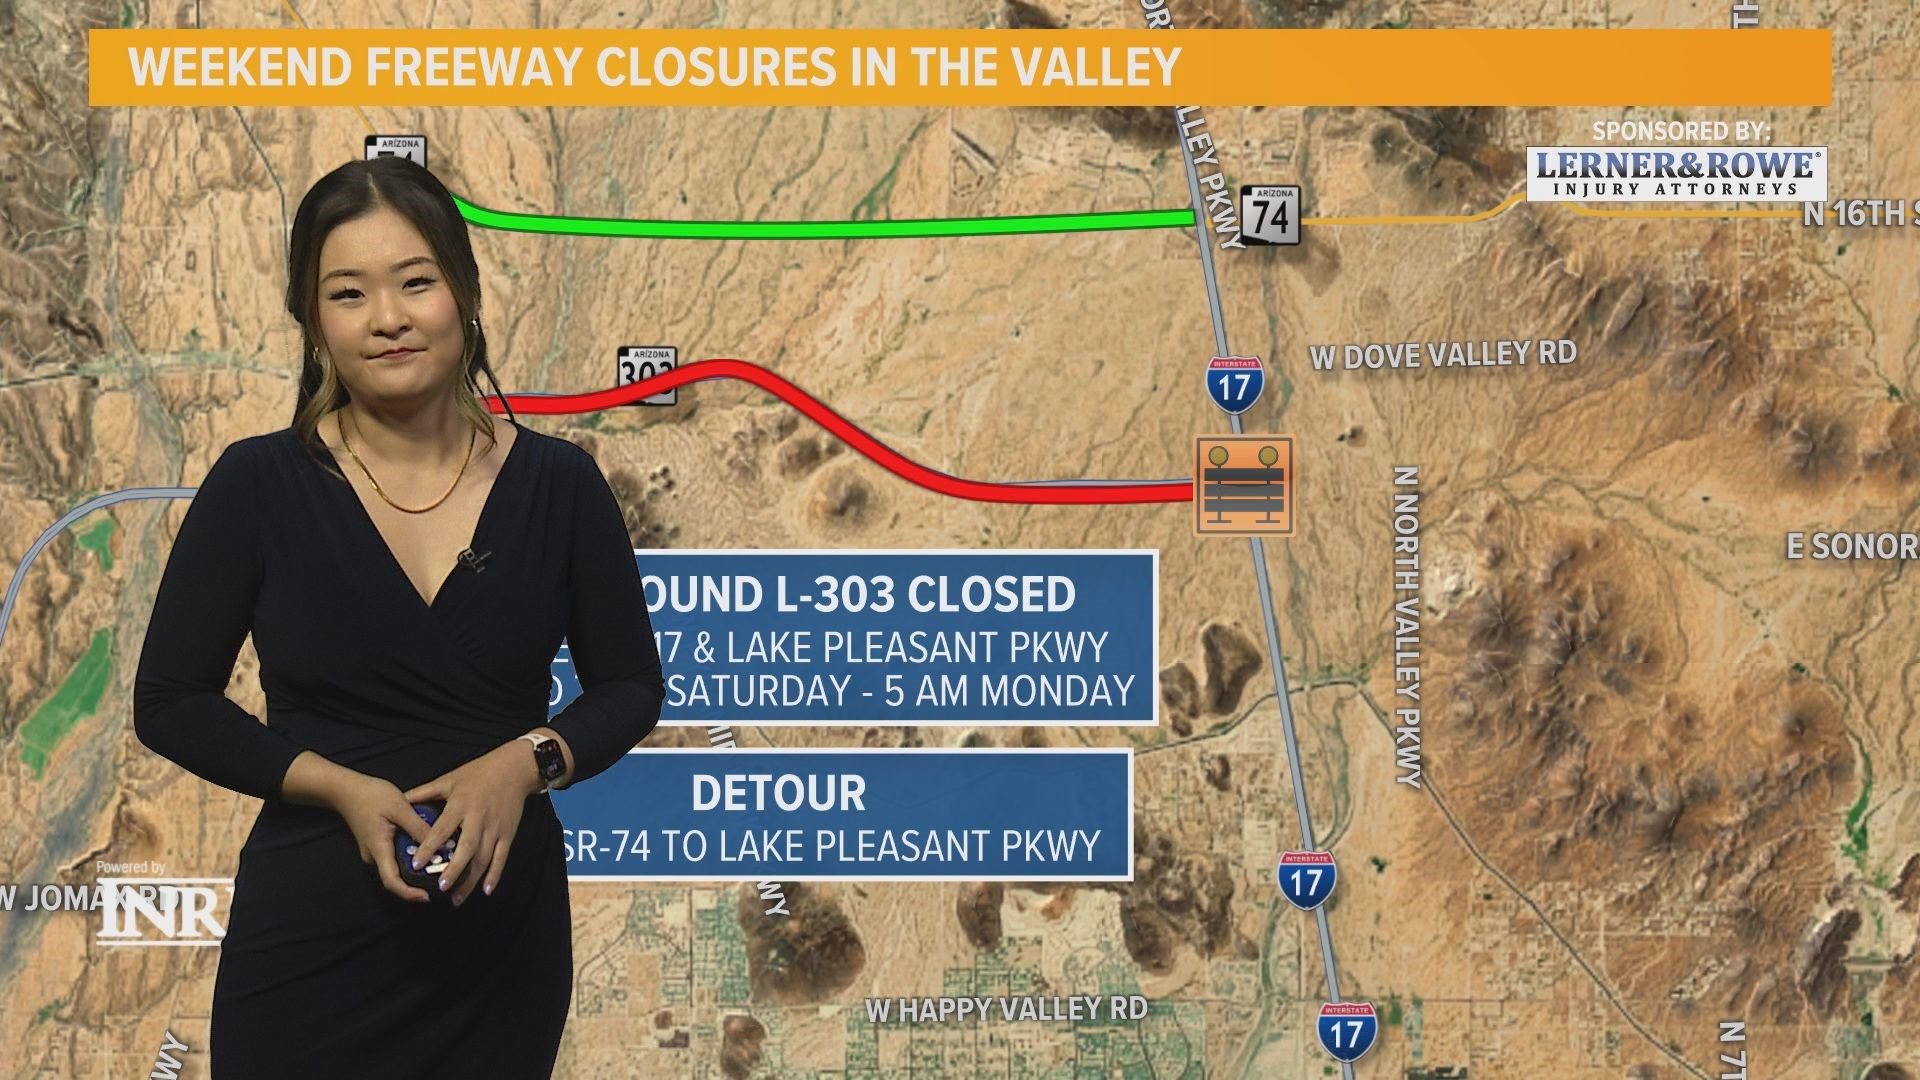 Stella Sun gives an update on the closures and detours during the June 2 weekend.